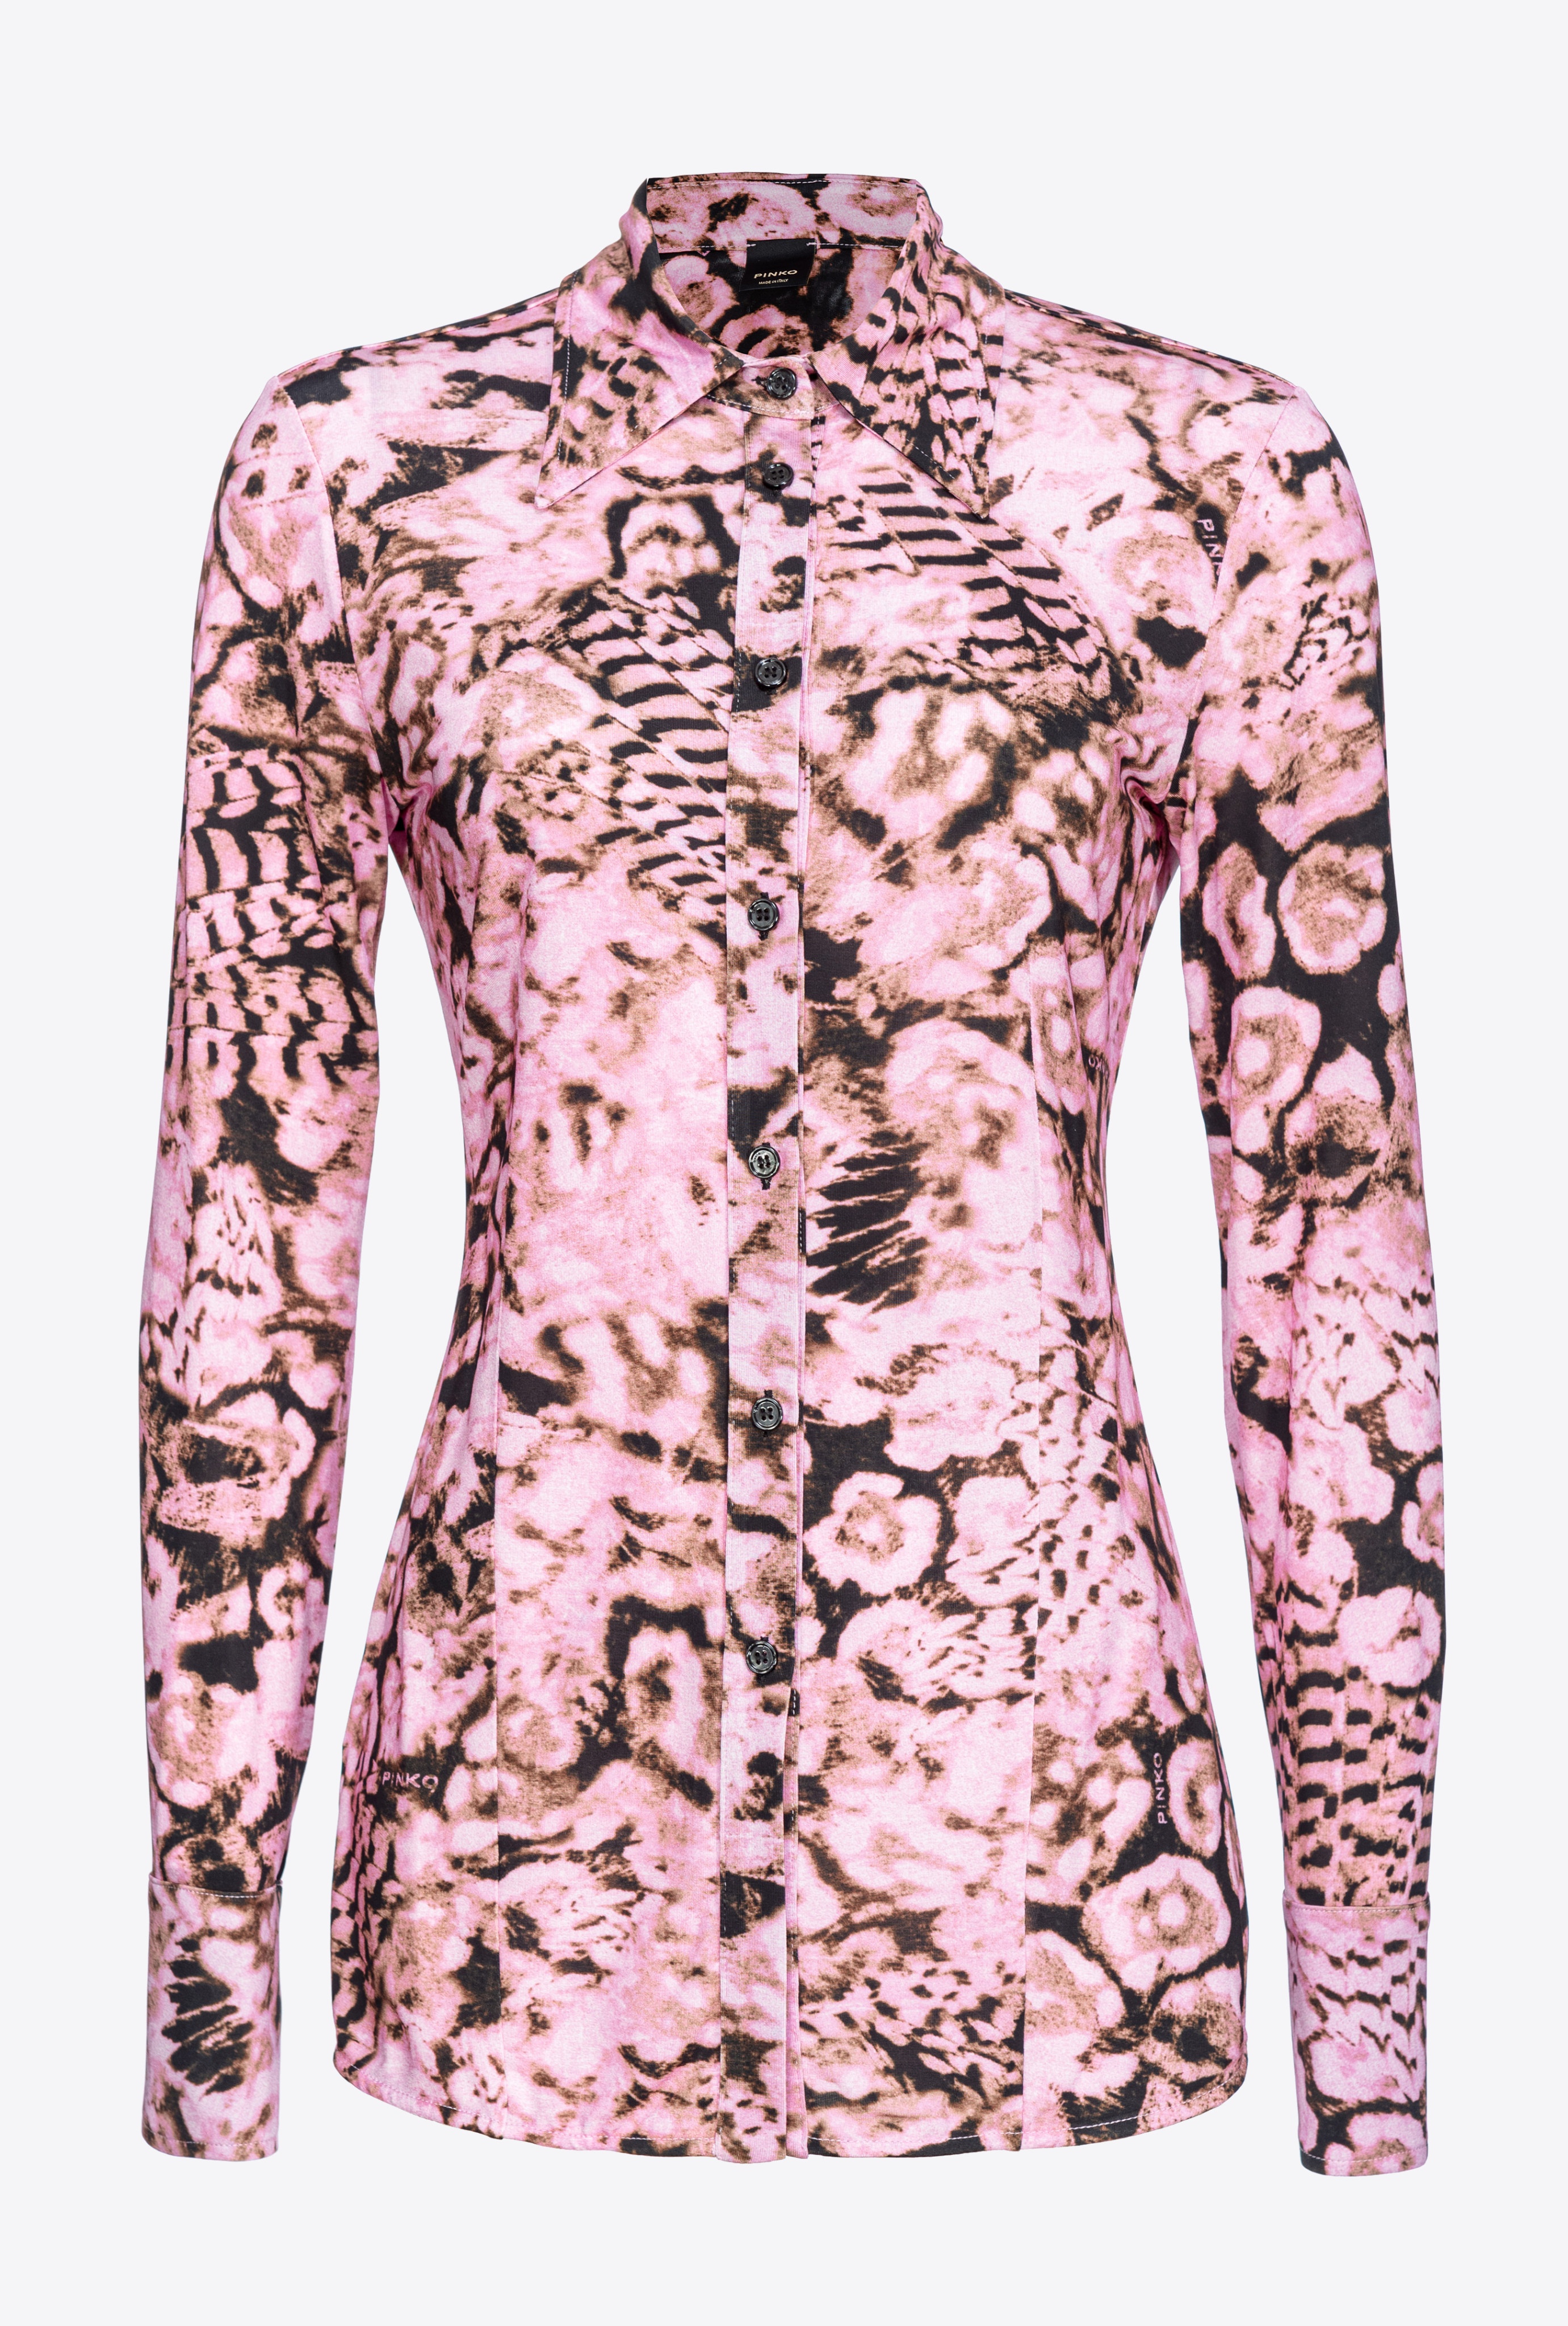 JERSEY SHIRT WITH SCANNER CORAL PRINT - 1